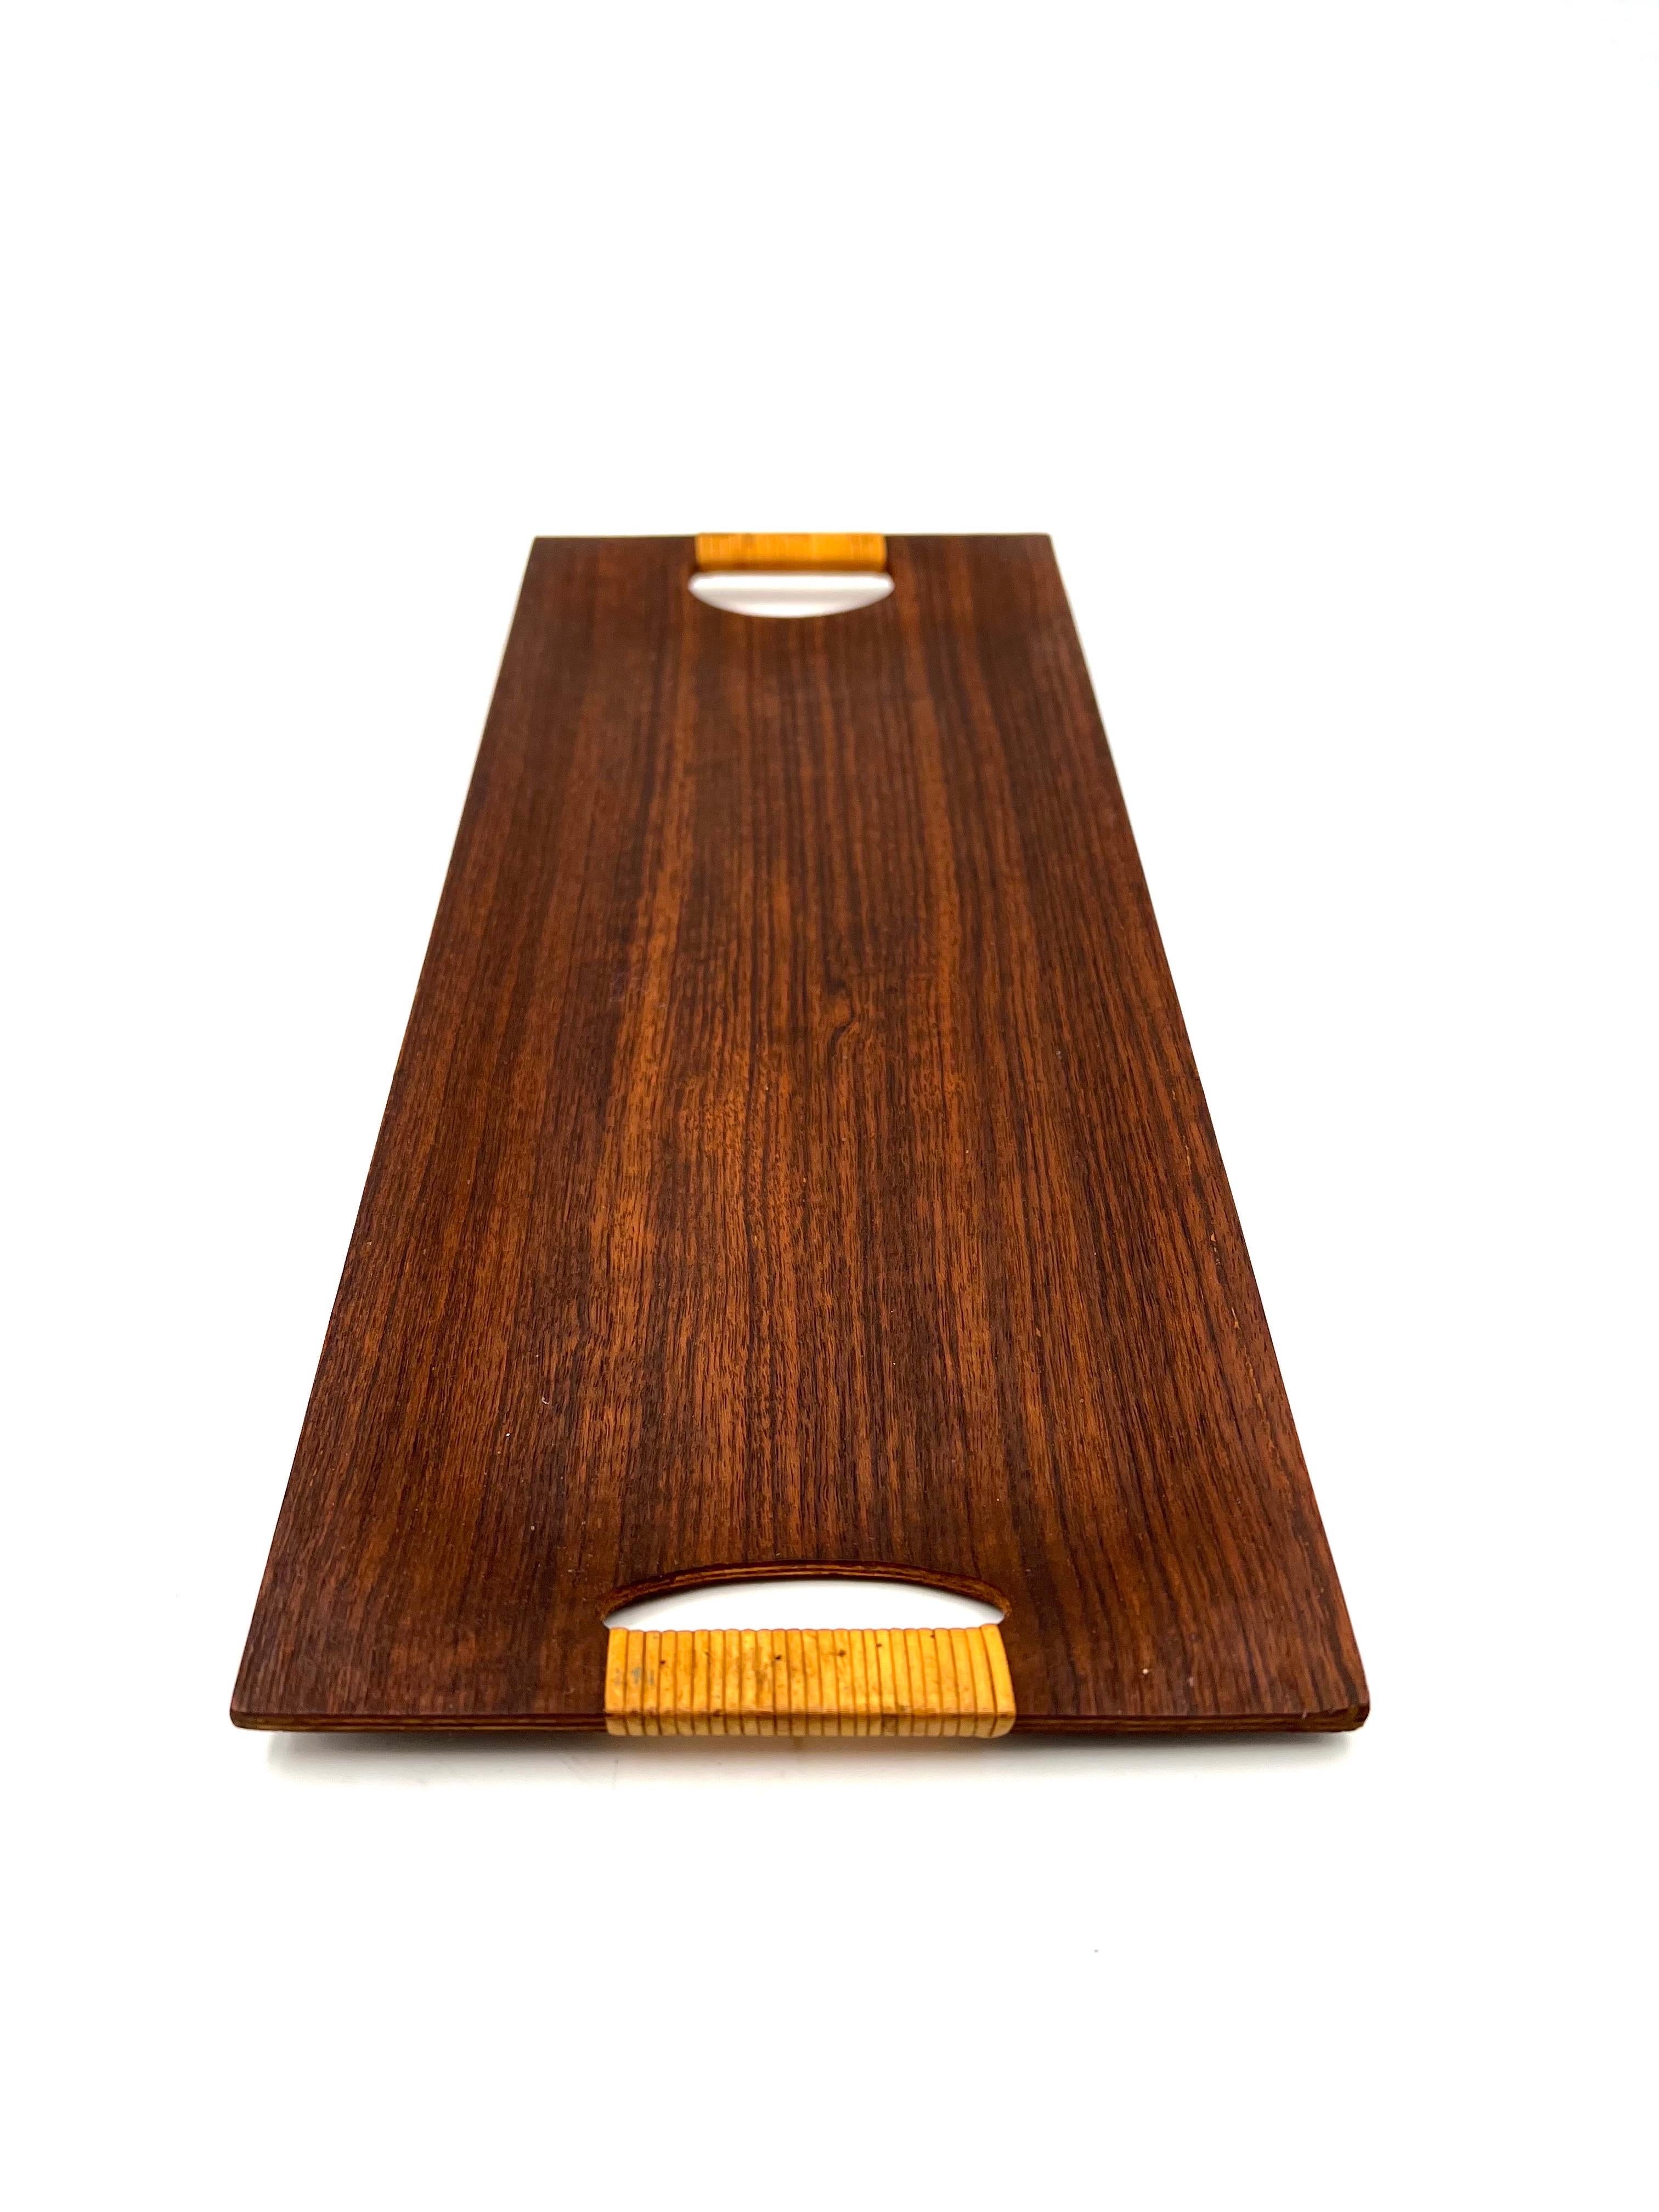 Beautiful and rare molded teak tray with cane handles simple delicate design, we have cleaned and oiled this beautiful and unique piece.